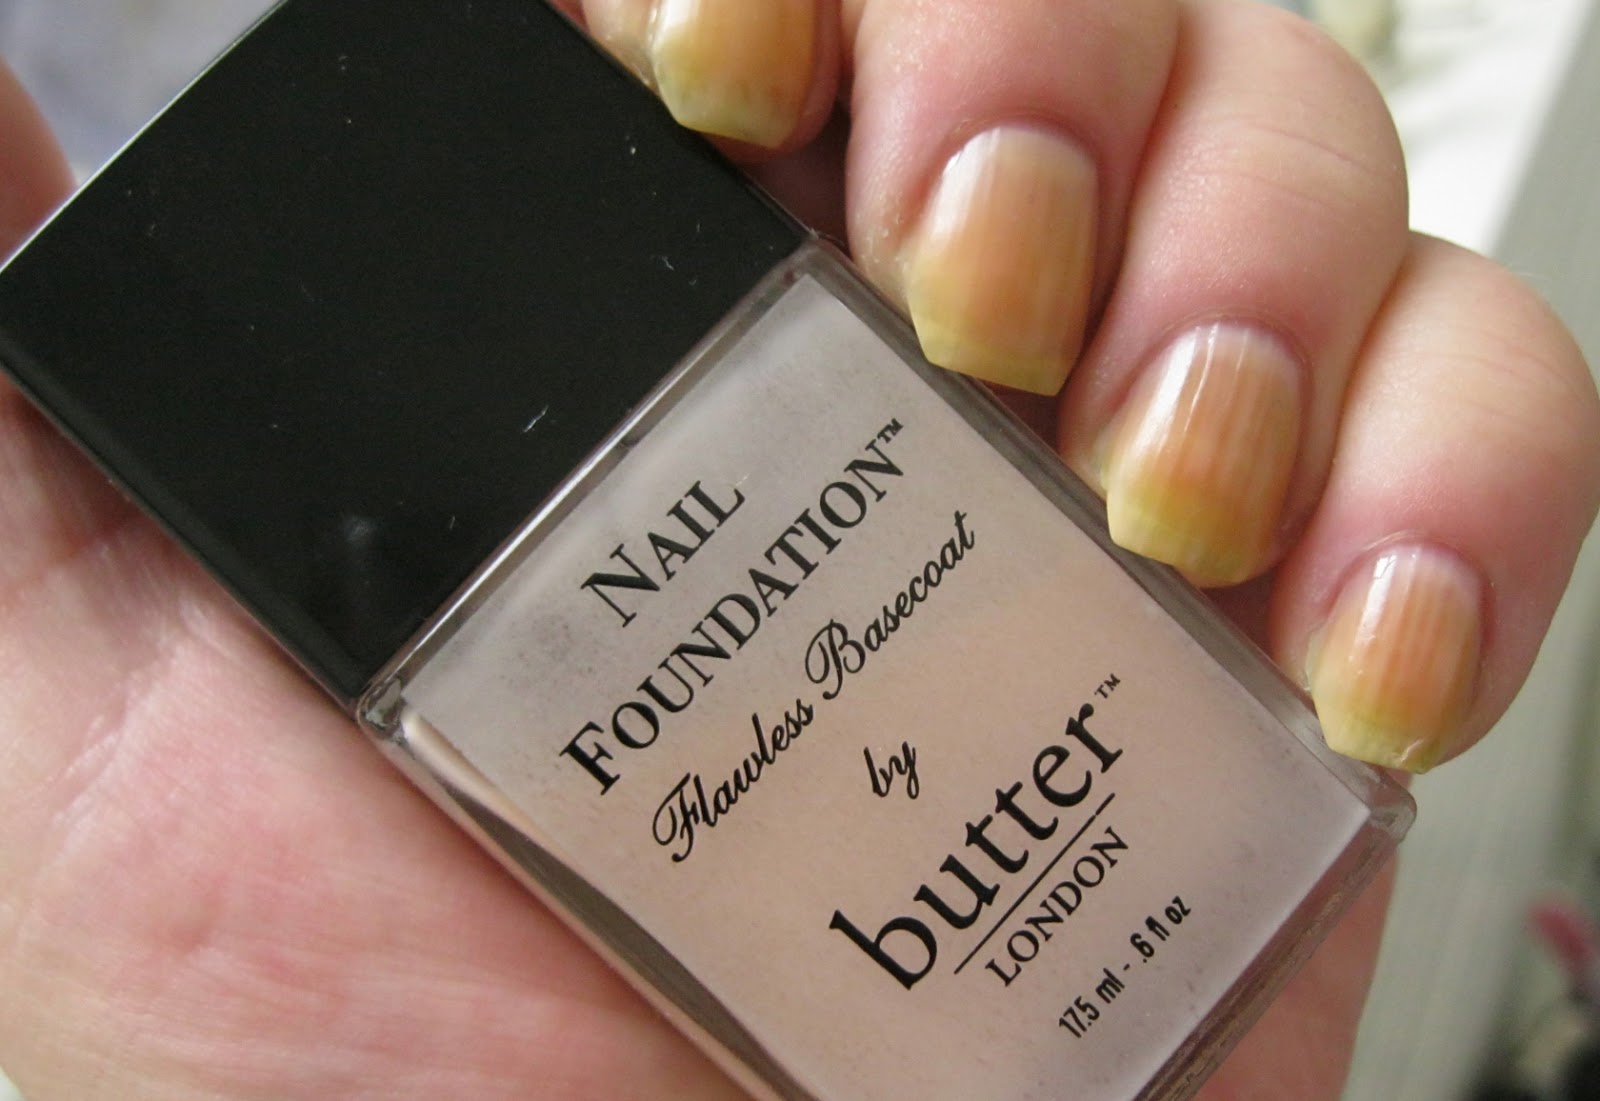 10. Butter London Nail Lacquer in "Molly Coddled" - wide 8